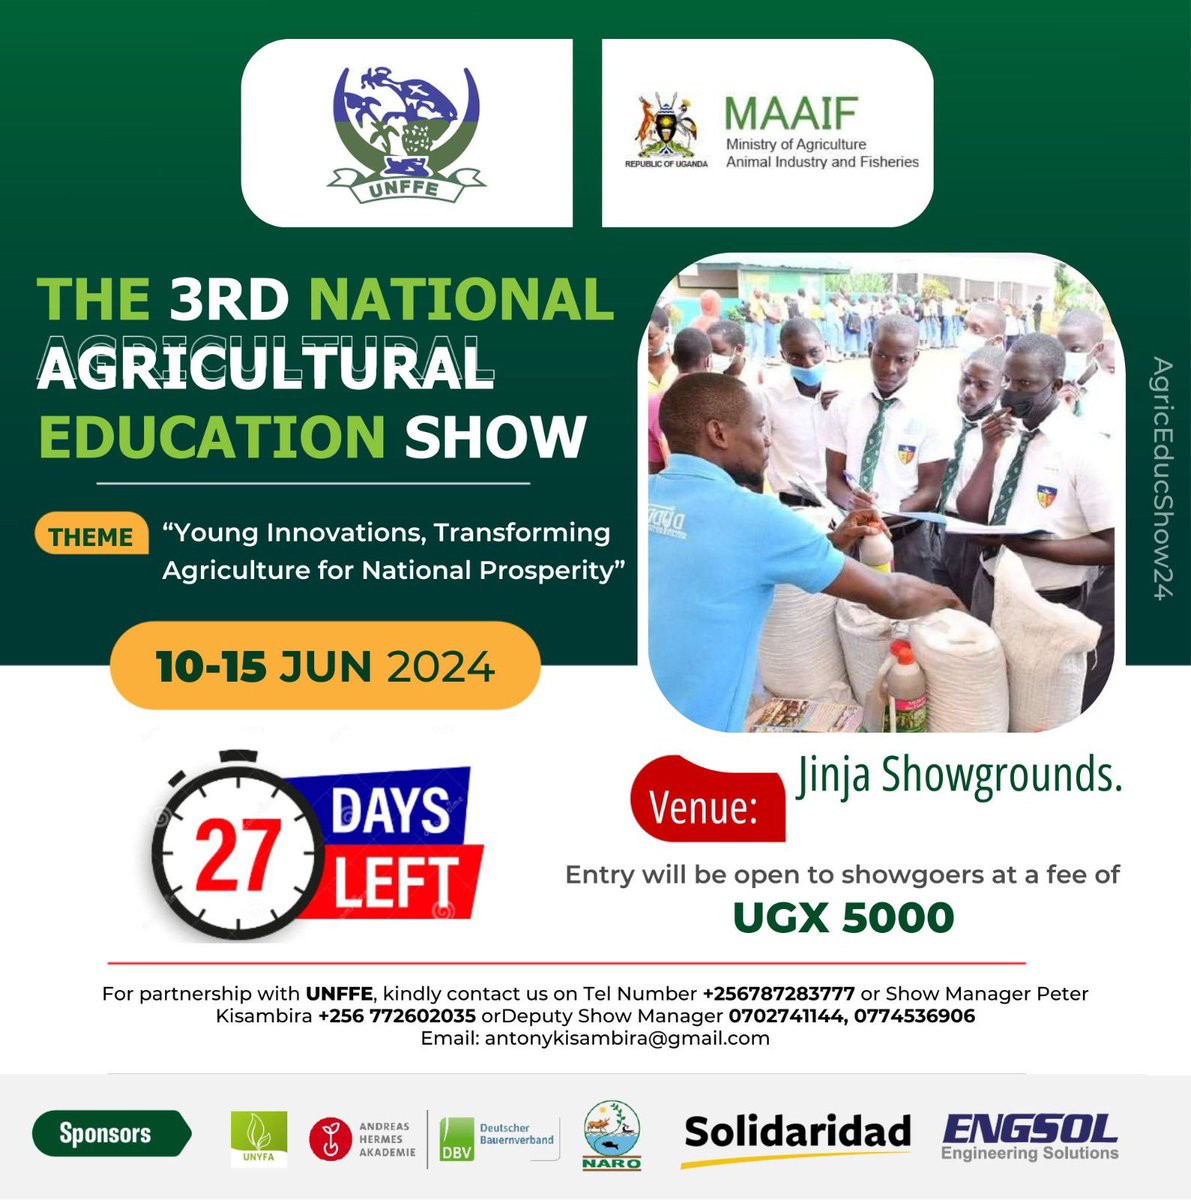 Countdown is on🥳🥳
We have 27 days left to the biggest National Agricultural Educational show ever happening at Jinja show grounds for only Shs 5000. 
⏰  June 10 - 15, 2024. 

#AgricEducShow24